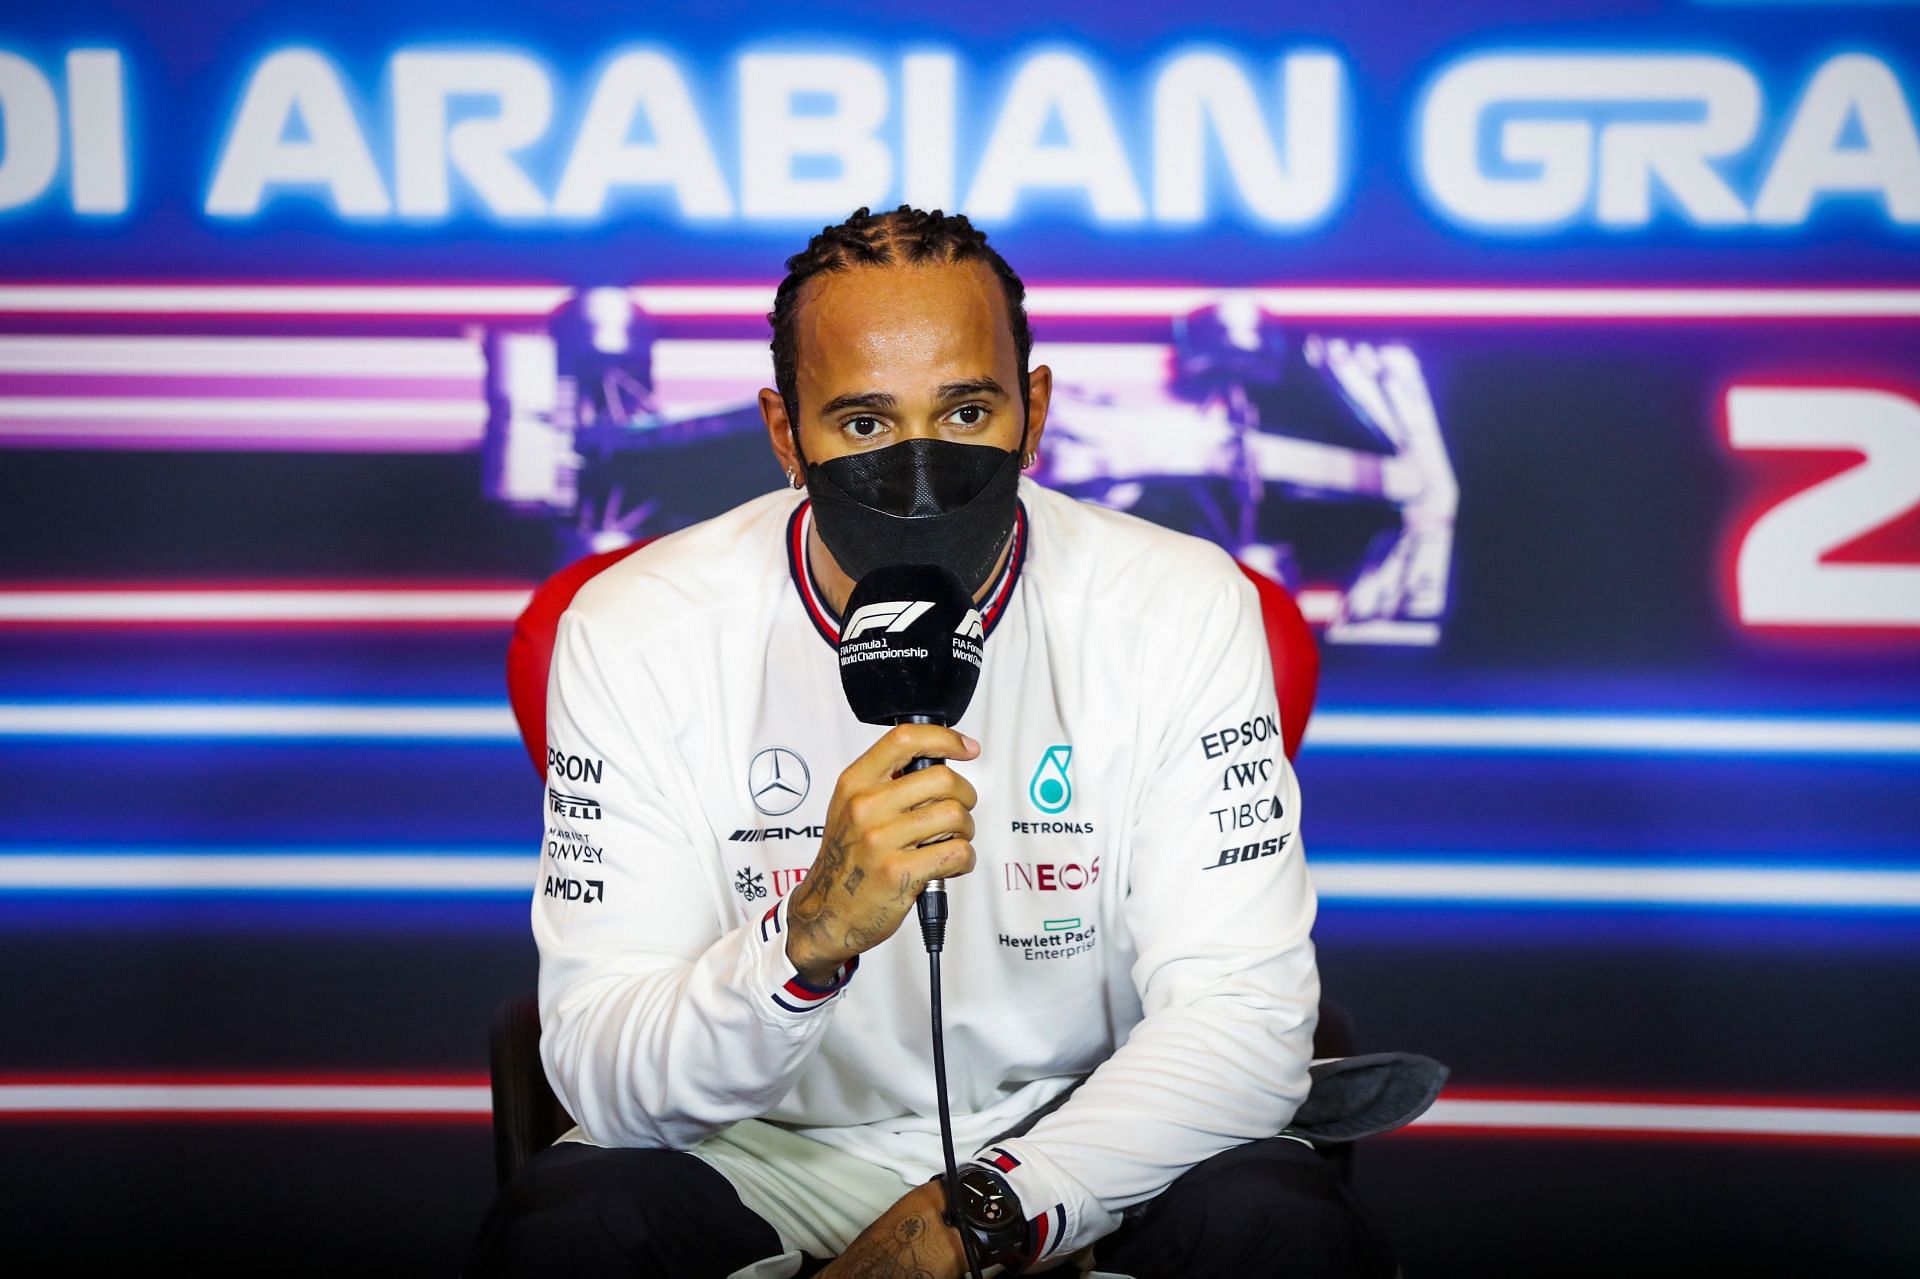 Lewis Hamilton talks in the press conference after qualifying ahead of the 2021 Saudi Arabia Grand Prix. (Photo by Florent Gooden - Pool/Getty Images)